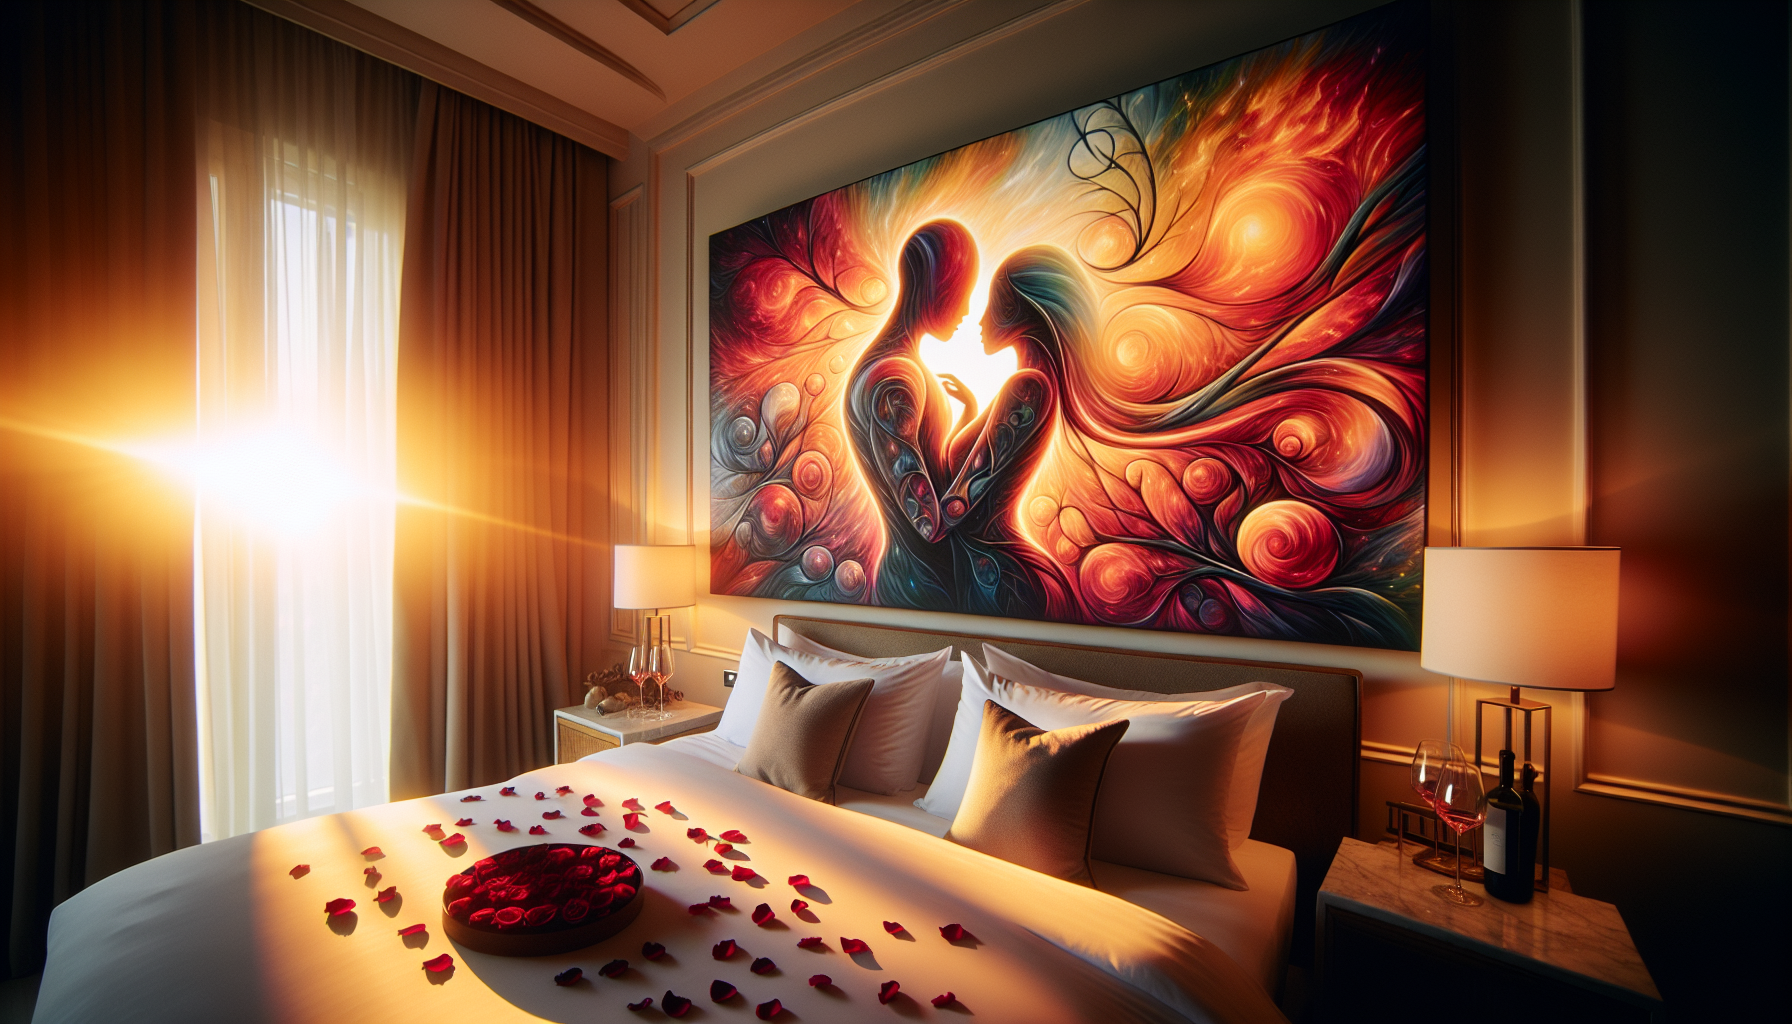 Colorful romantic artwork evoking love and passion in a bedroom